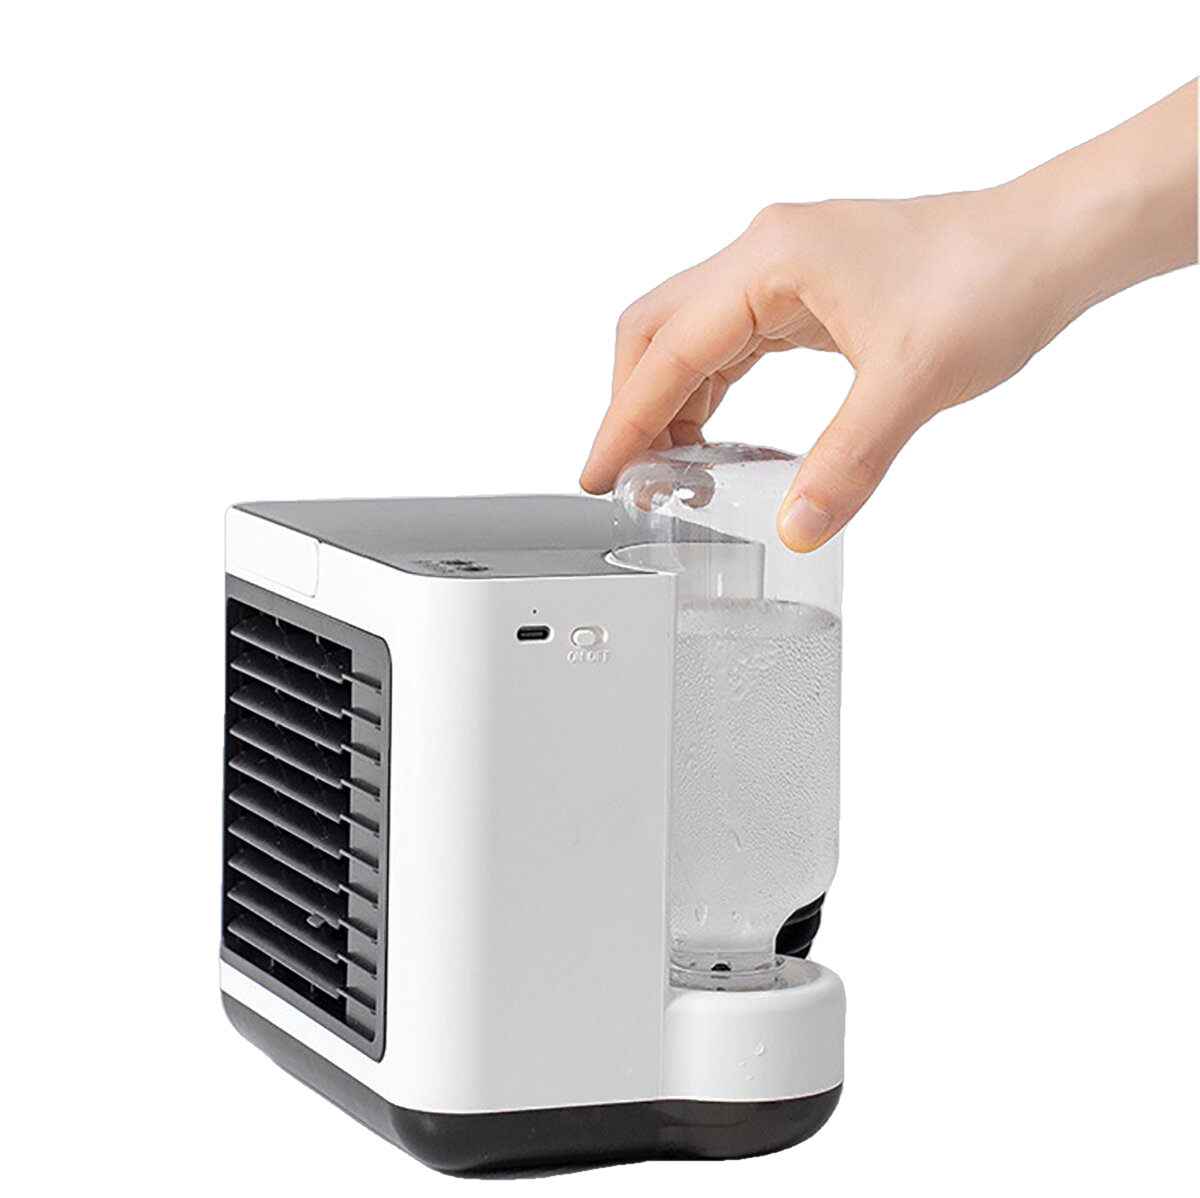 2000mAh USB Fan Portable Negative Ion Air Conditioning Fan Desktop Air Cooler Small Water Cooling Fan with 3 Wind Speeds